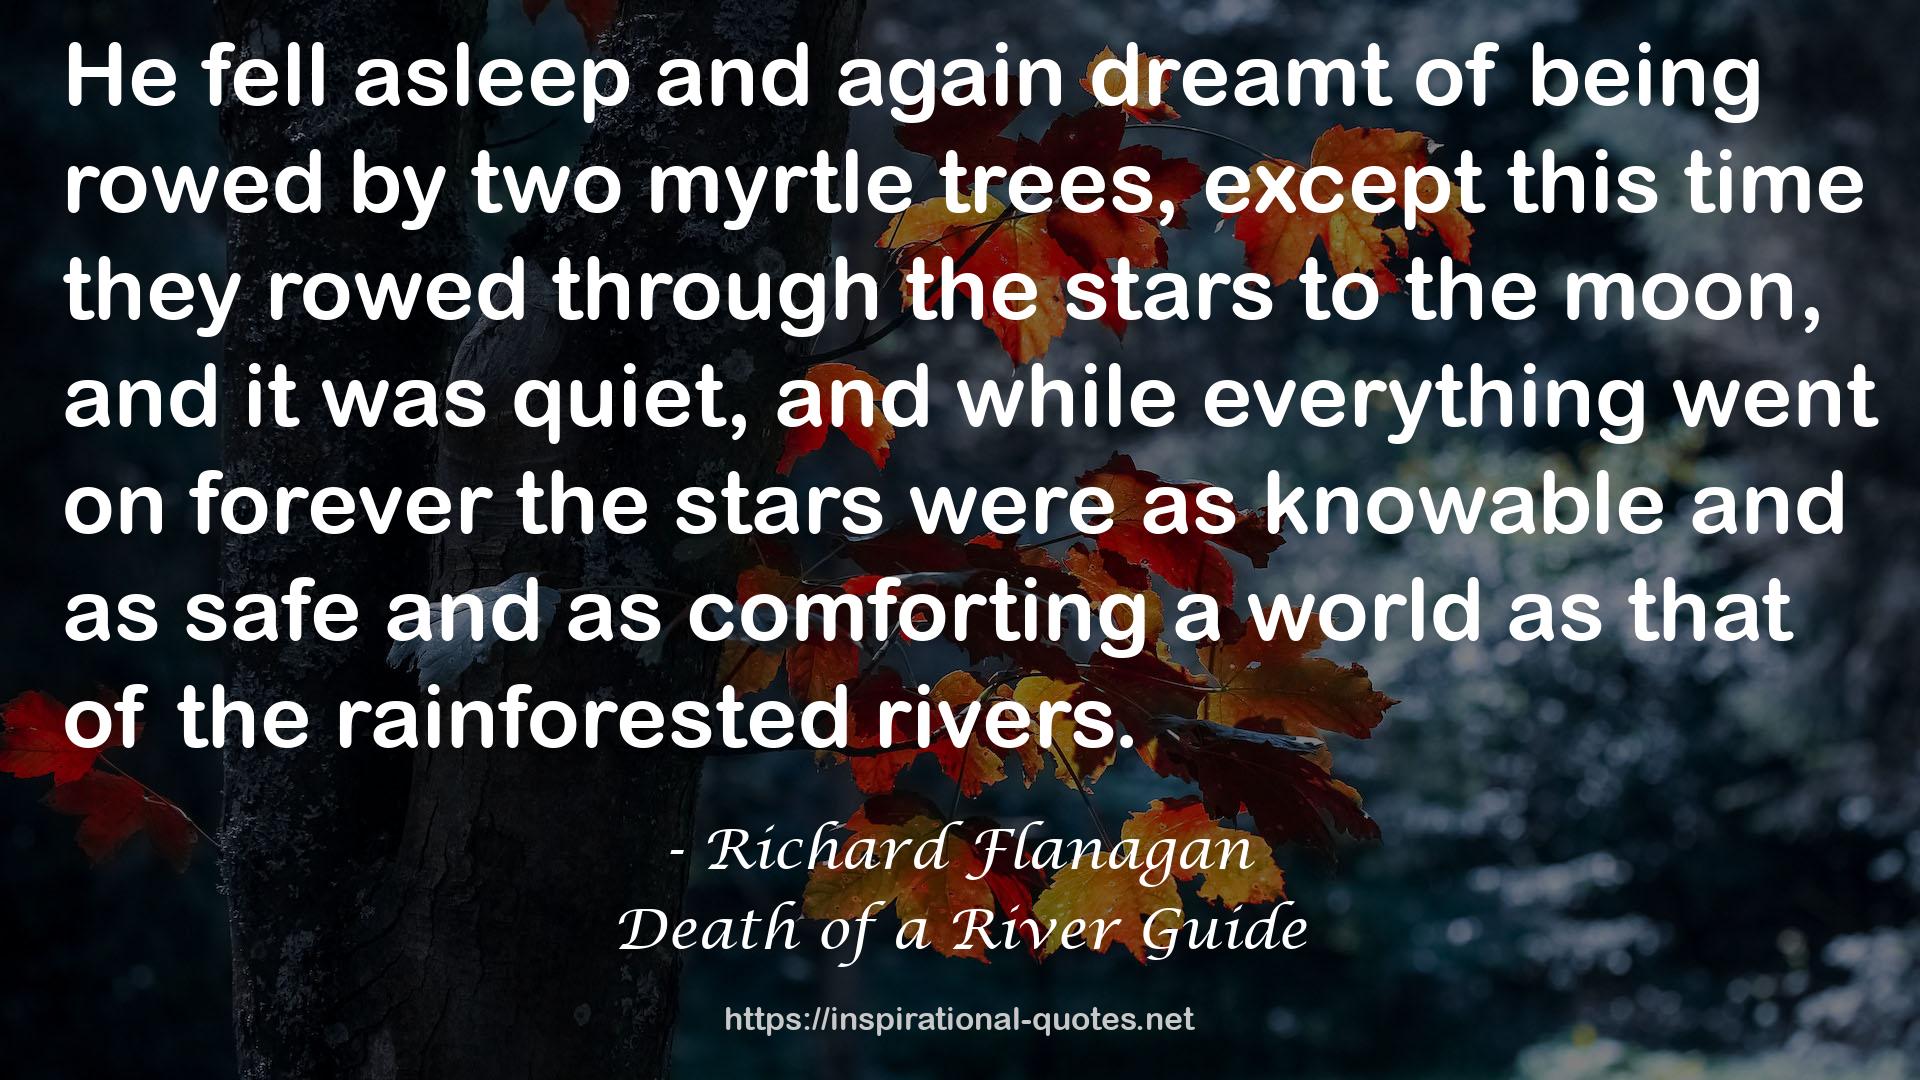 Death of a River Guide QUOTES